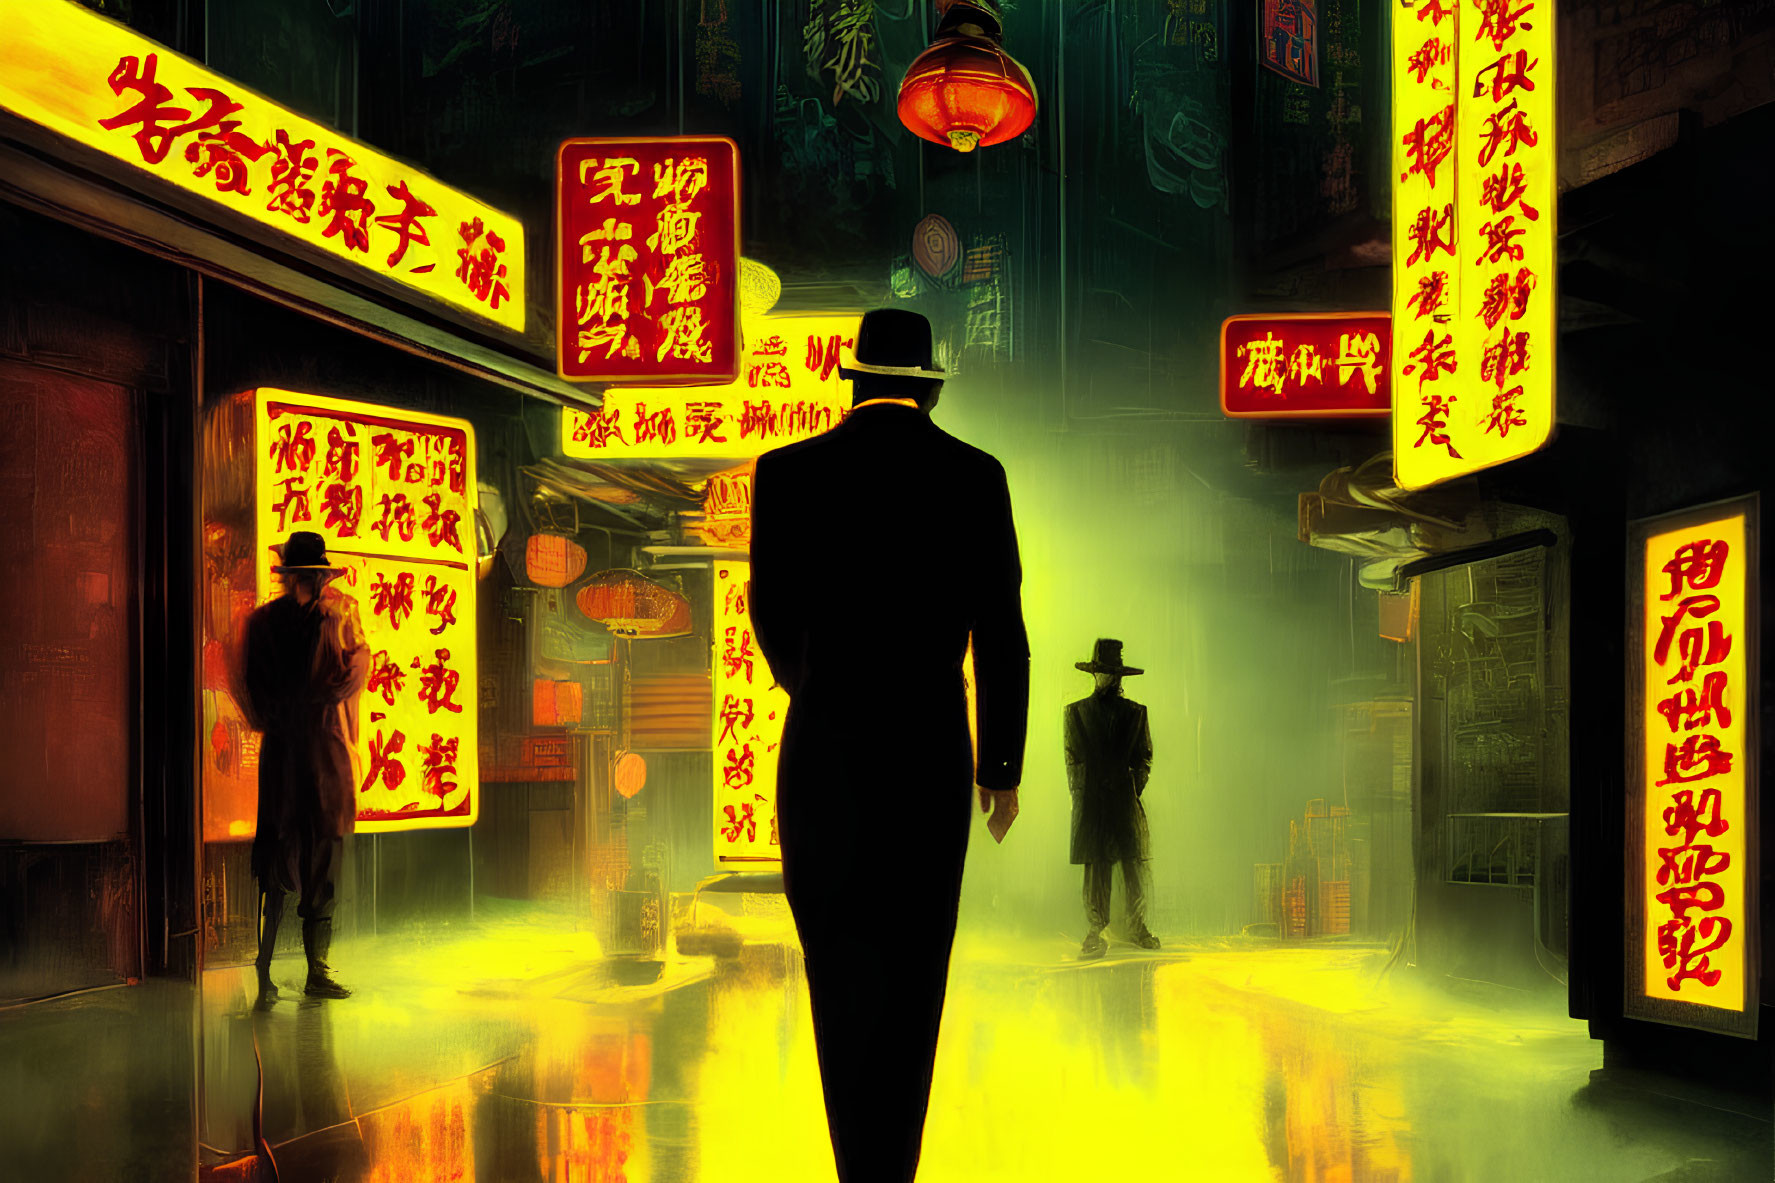 Neon-lit rain-soaked alley with silhouetted figures and Chinese signboards